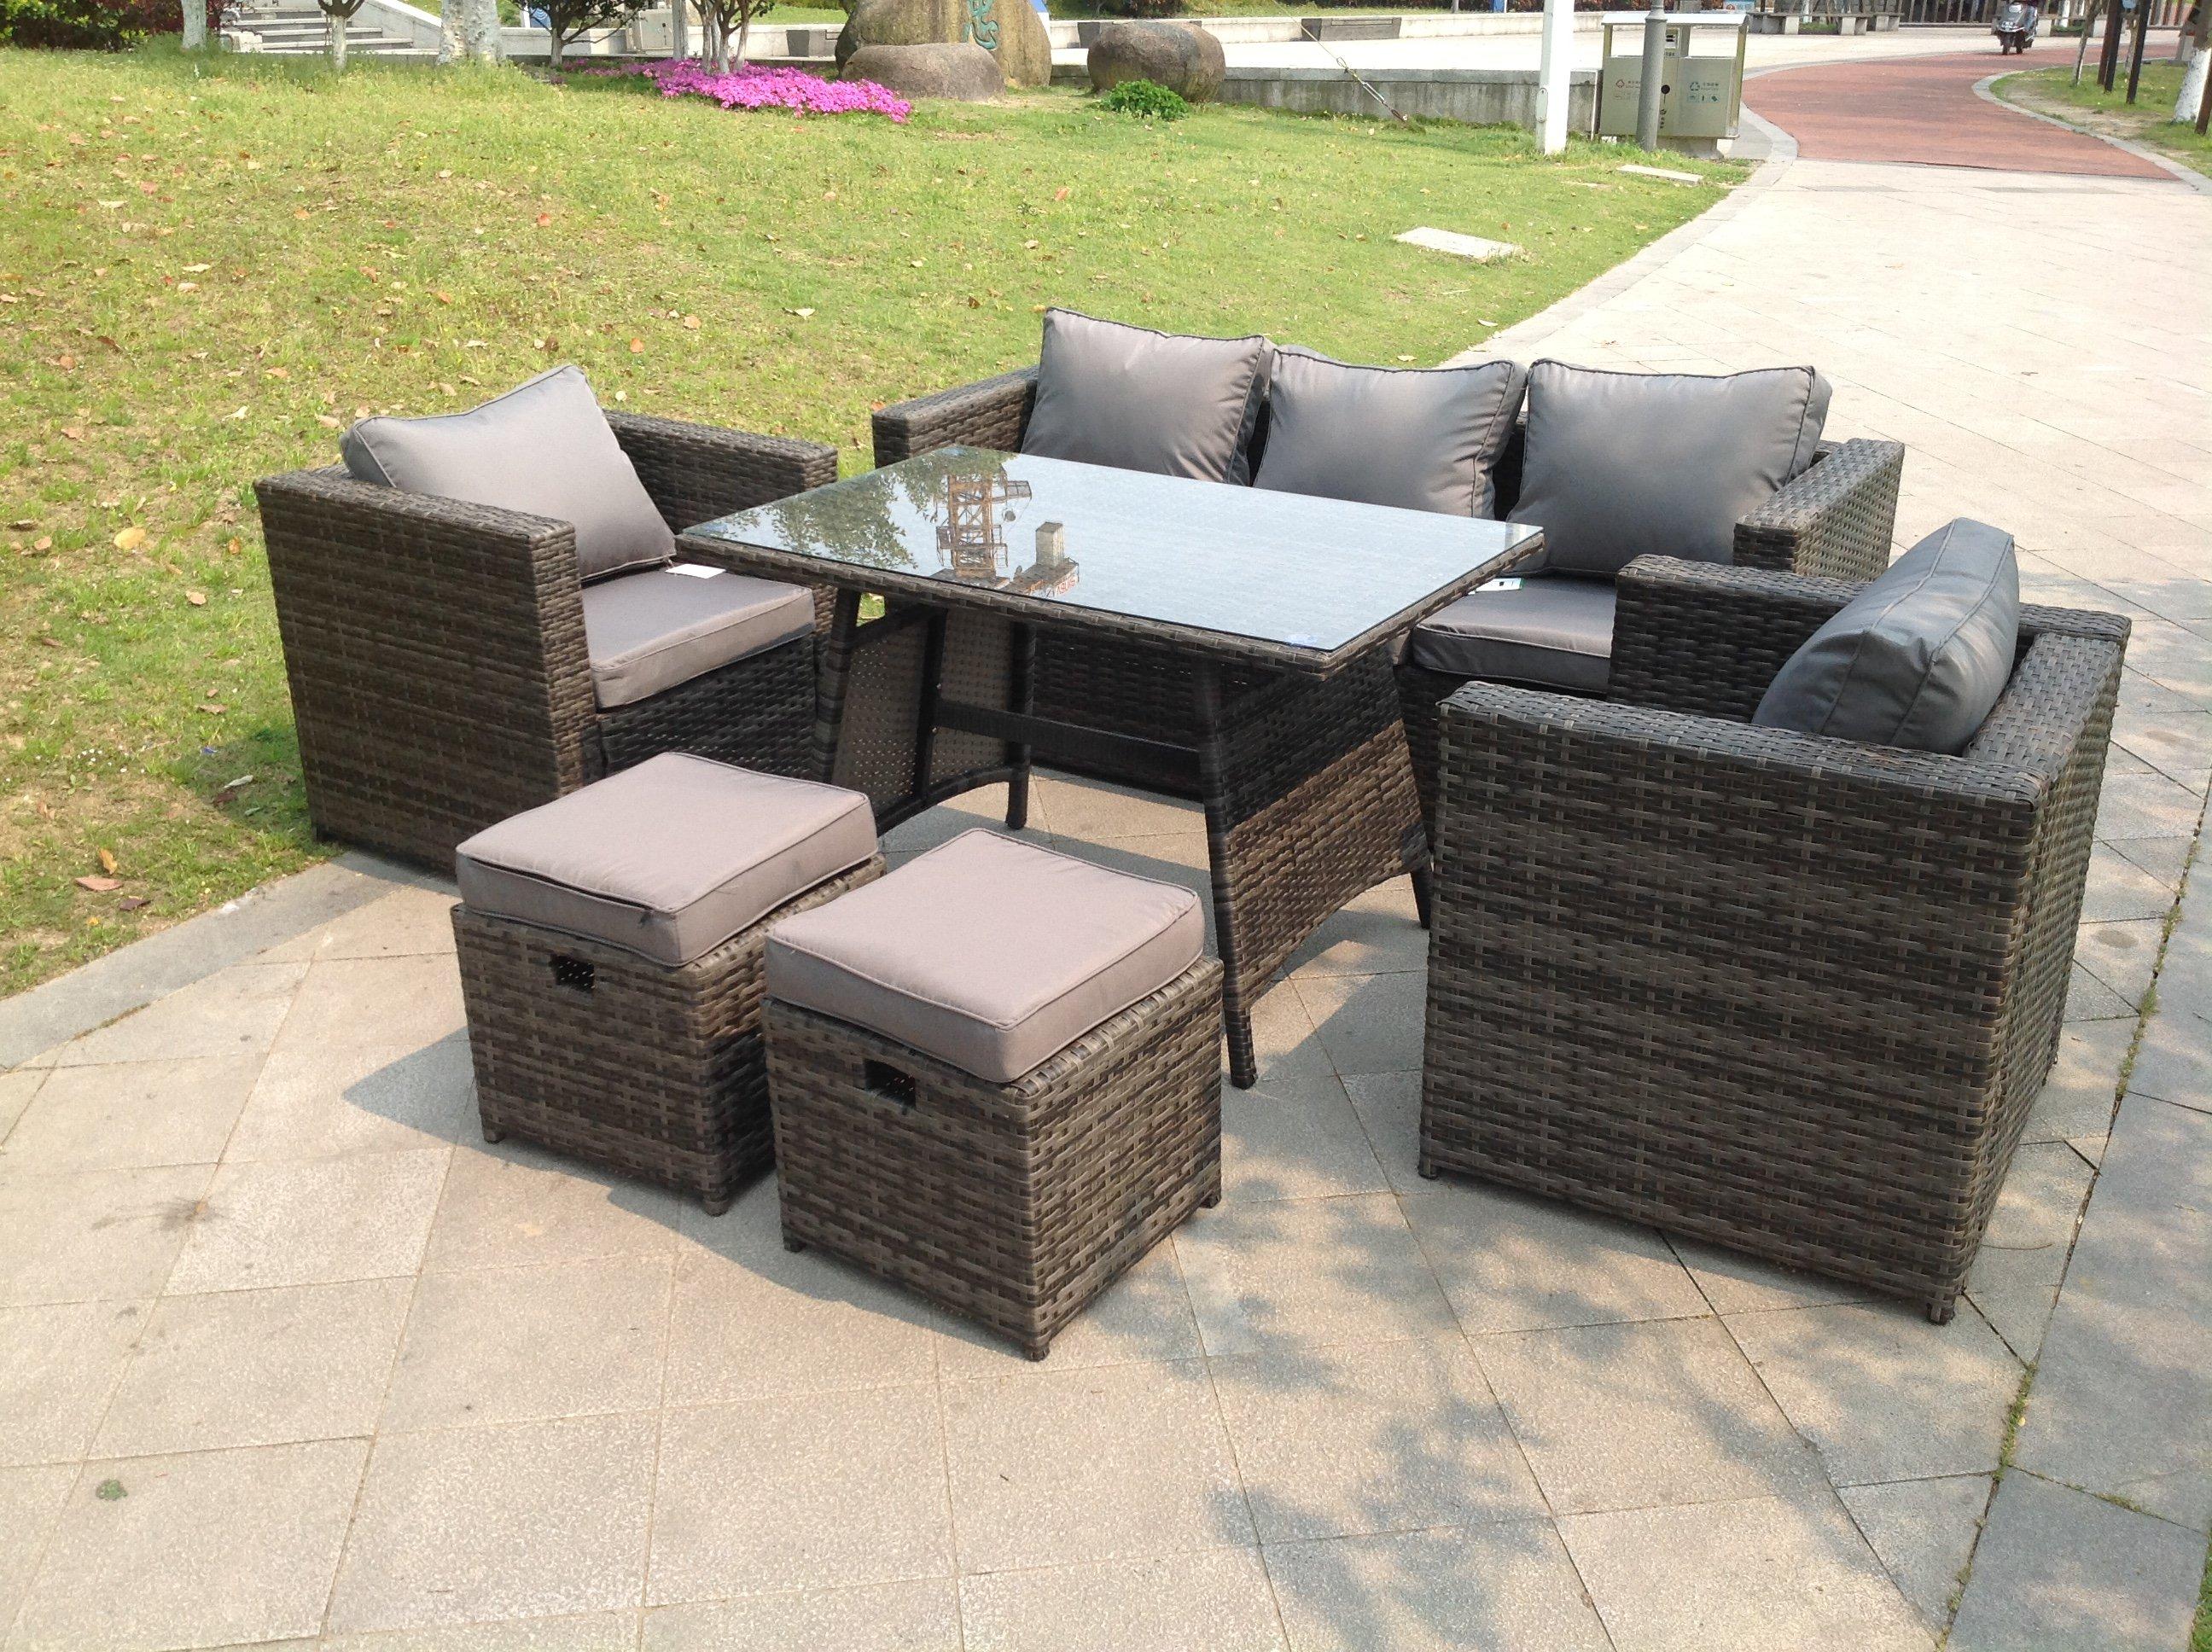 Rattan Garden Outdoor Sofa Set Chairs Rectangular Dining Table 2 Small Footstools 7 Seater